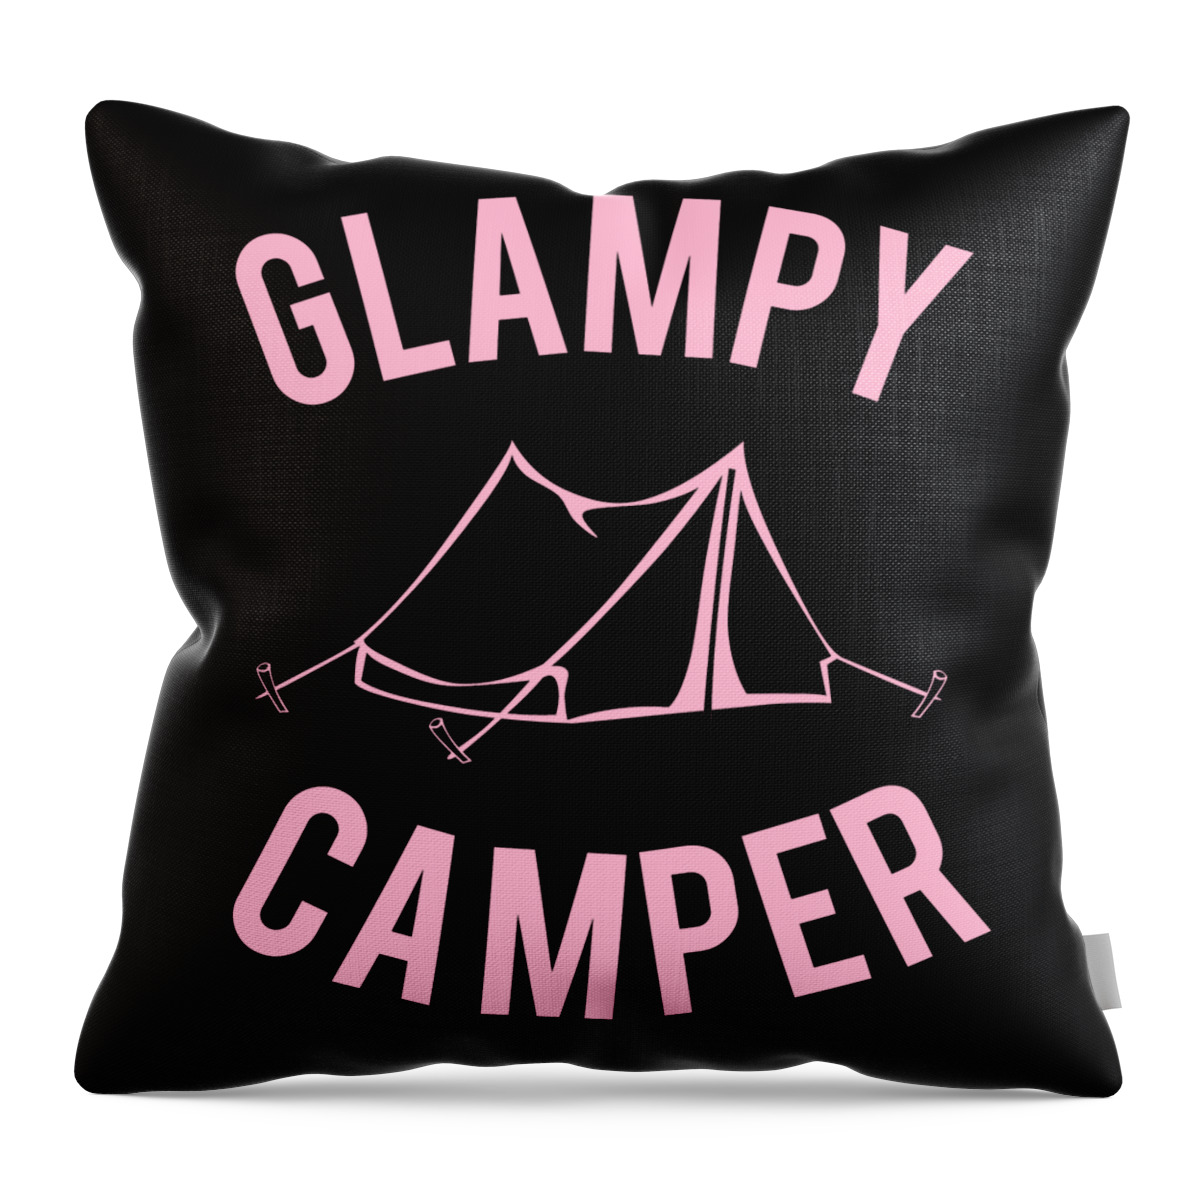 Funny Throw Pillow featuring the digital art Glampy Camper by Flippin Sweet Gear